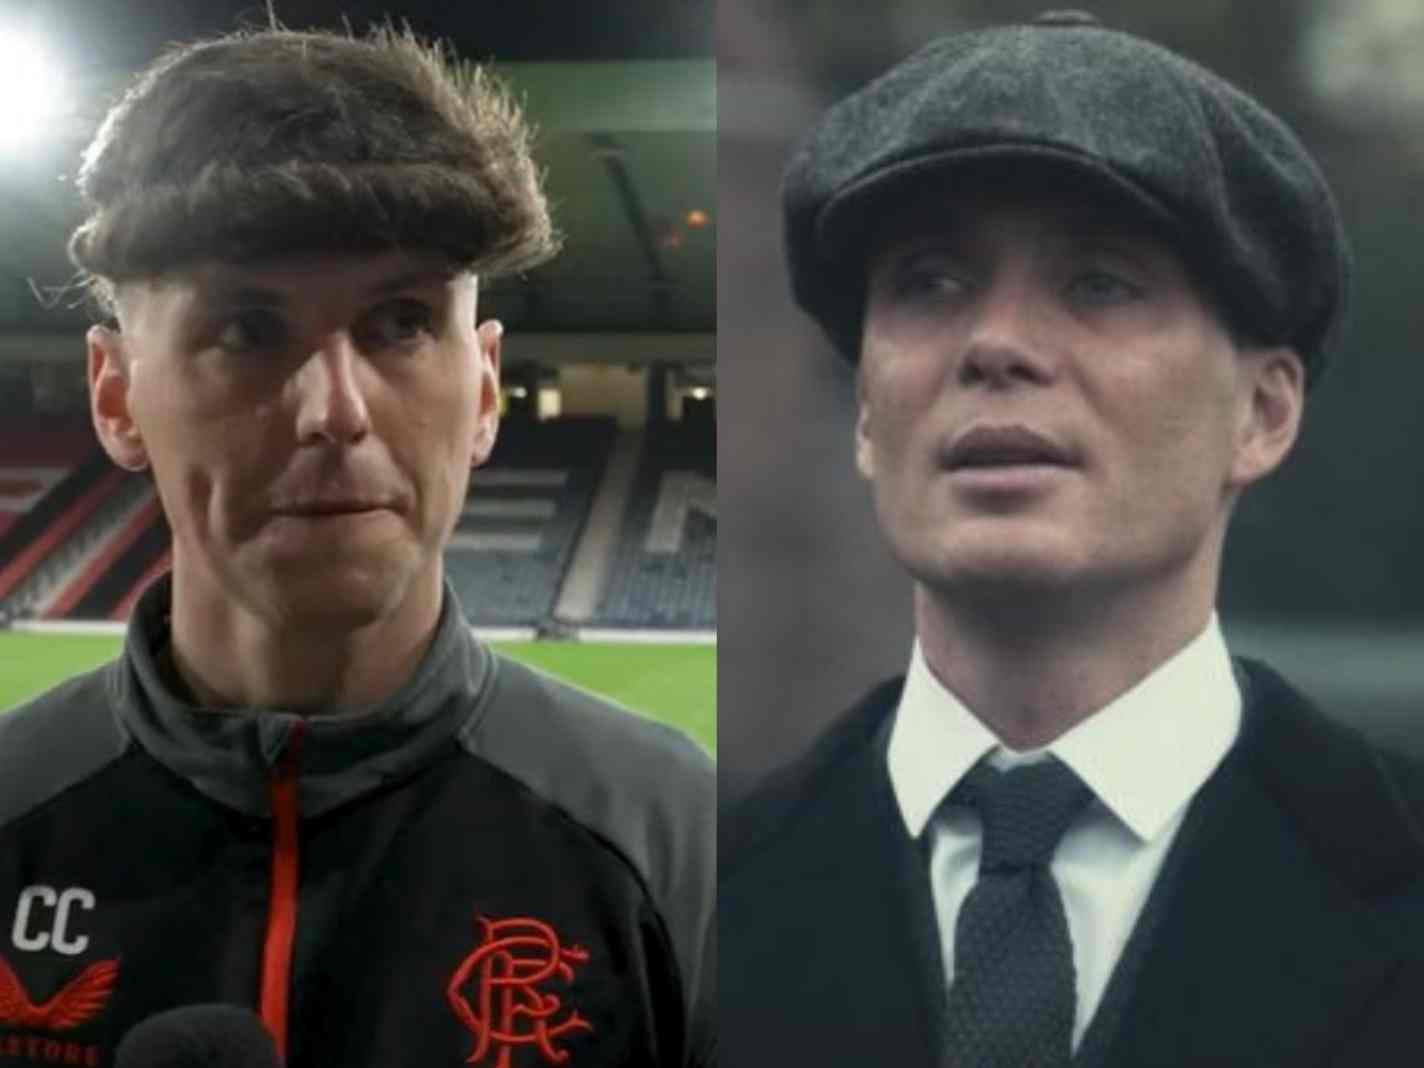 Cameron Campbell – The Rangers youth coach going viral because of unique Peaky Blinders haircut